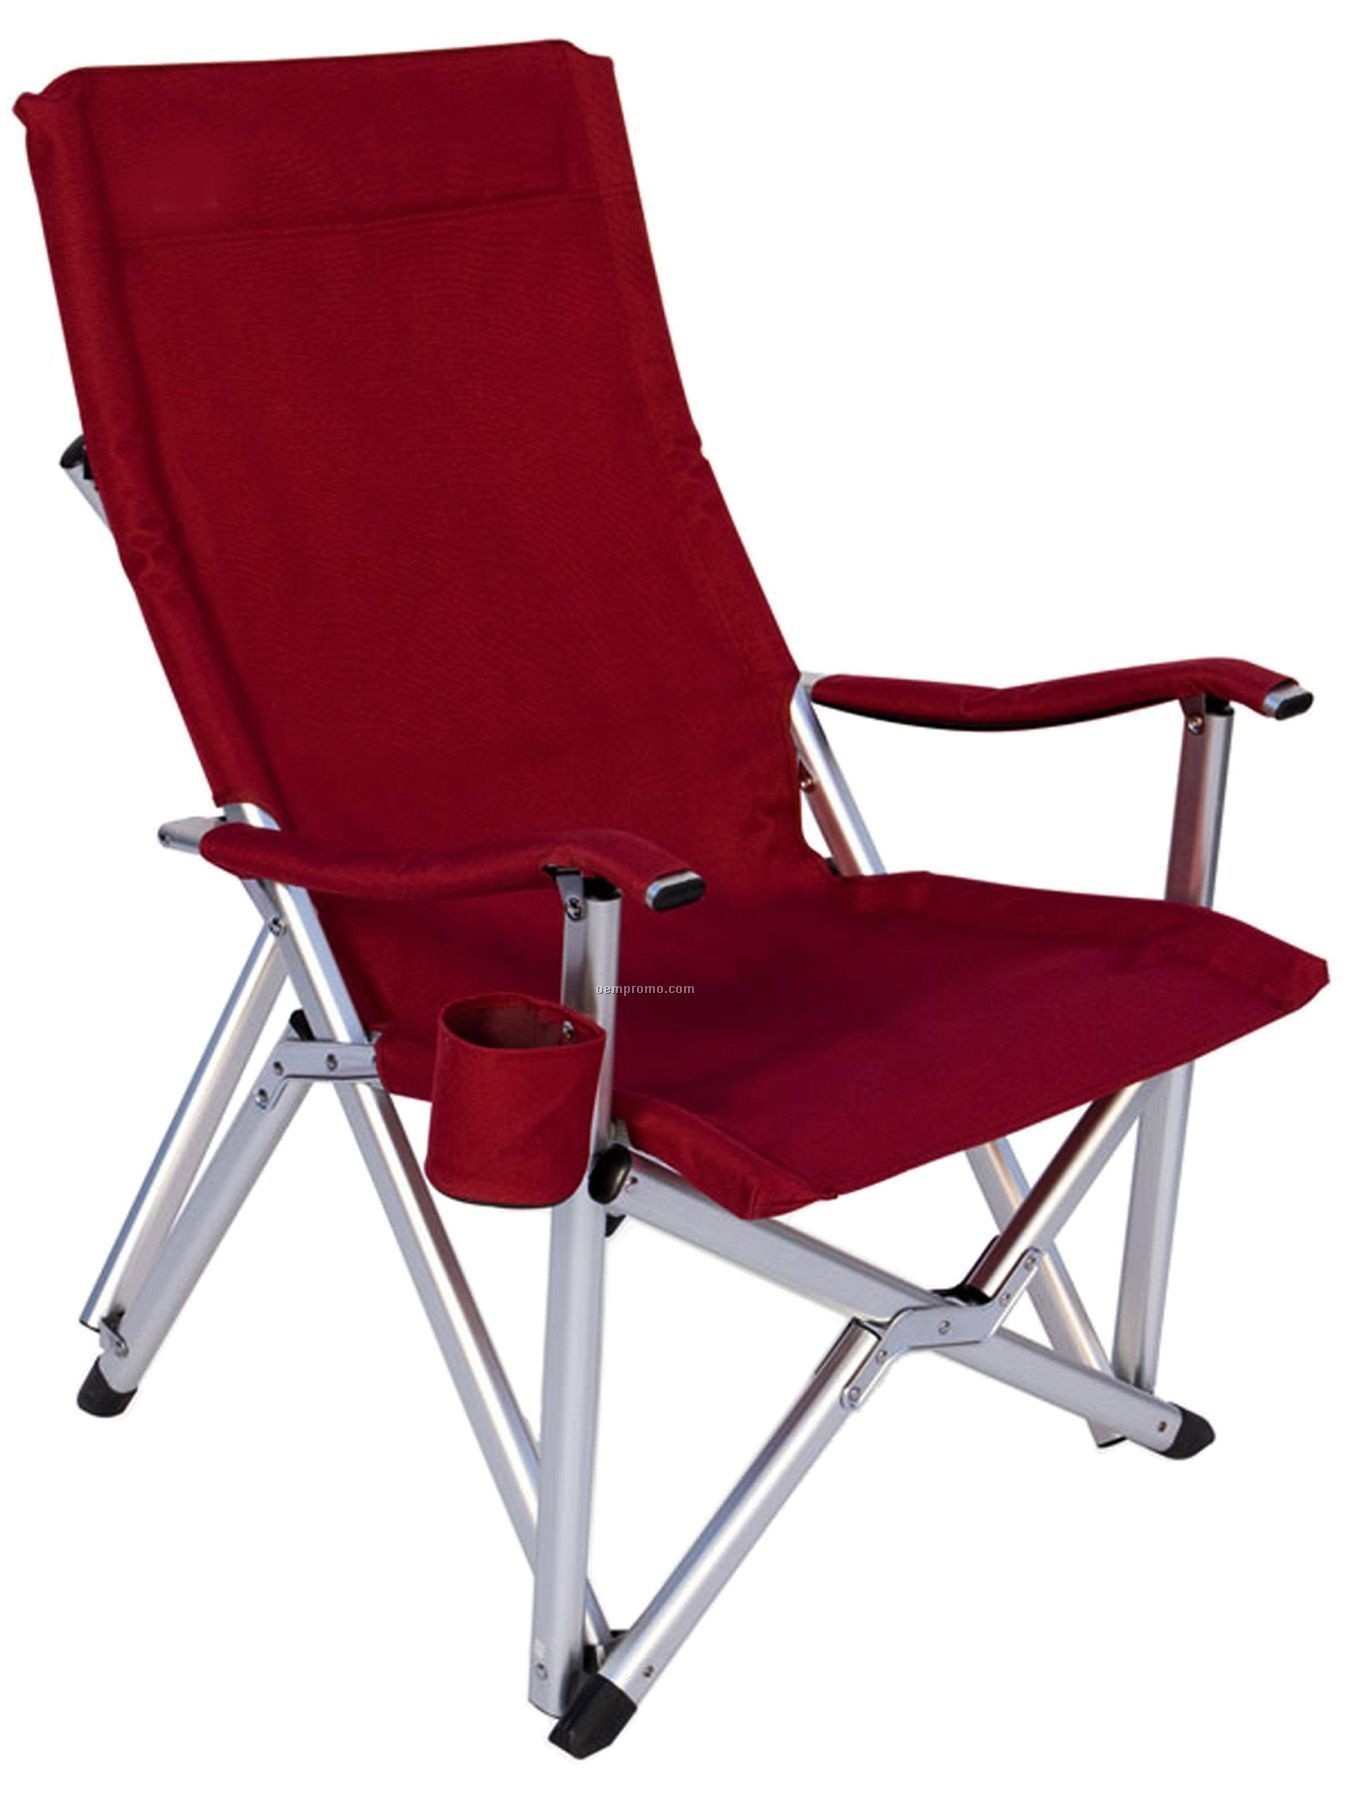 Imported Deluxe Folding High Back Aluminum Arm Chair W 375 Lb Weight 